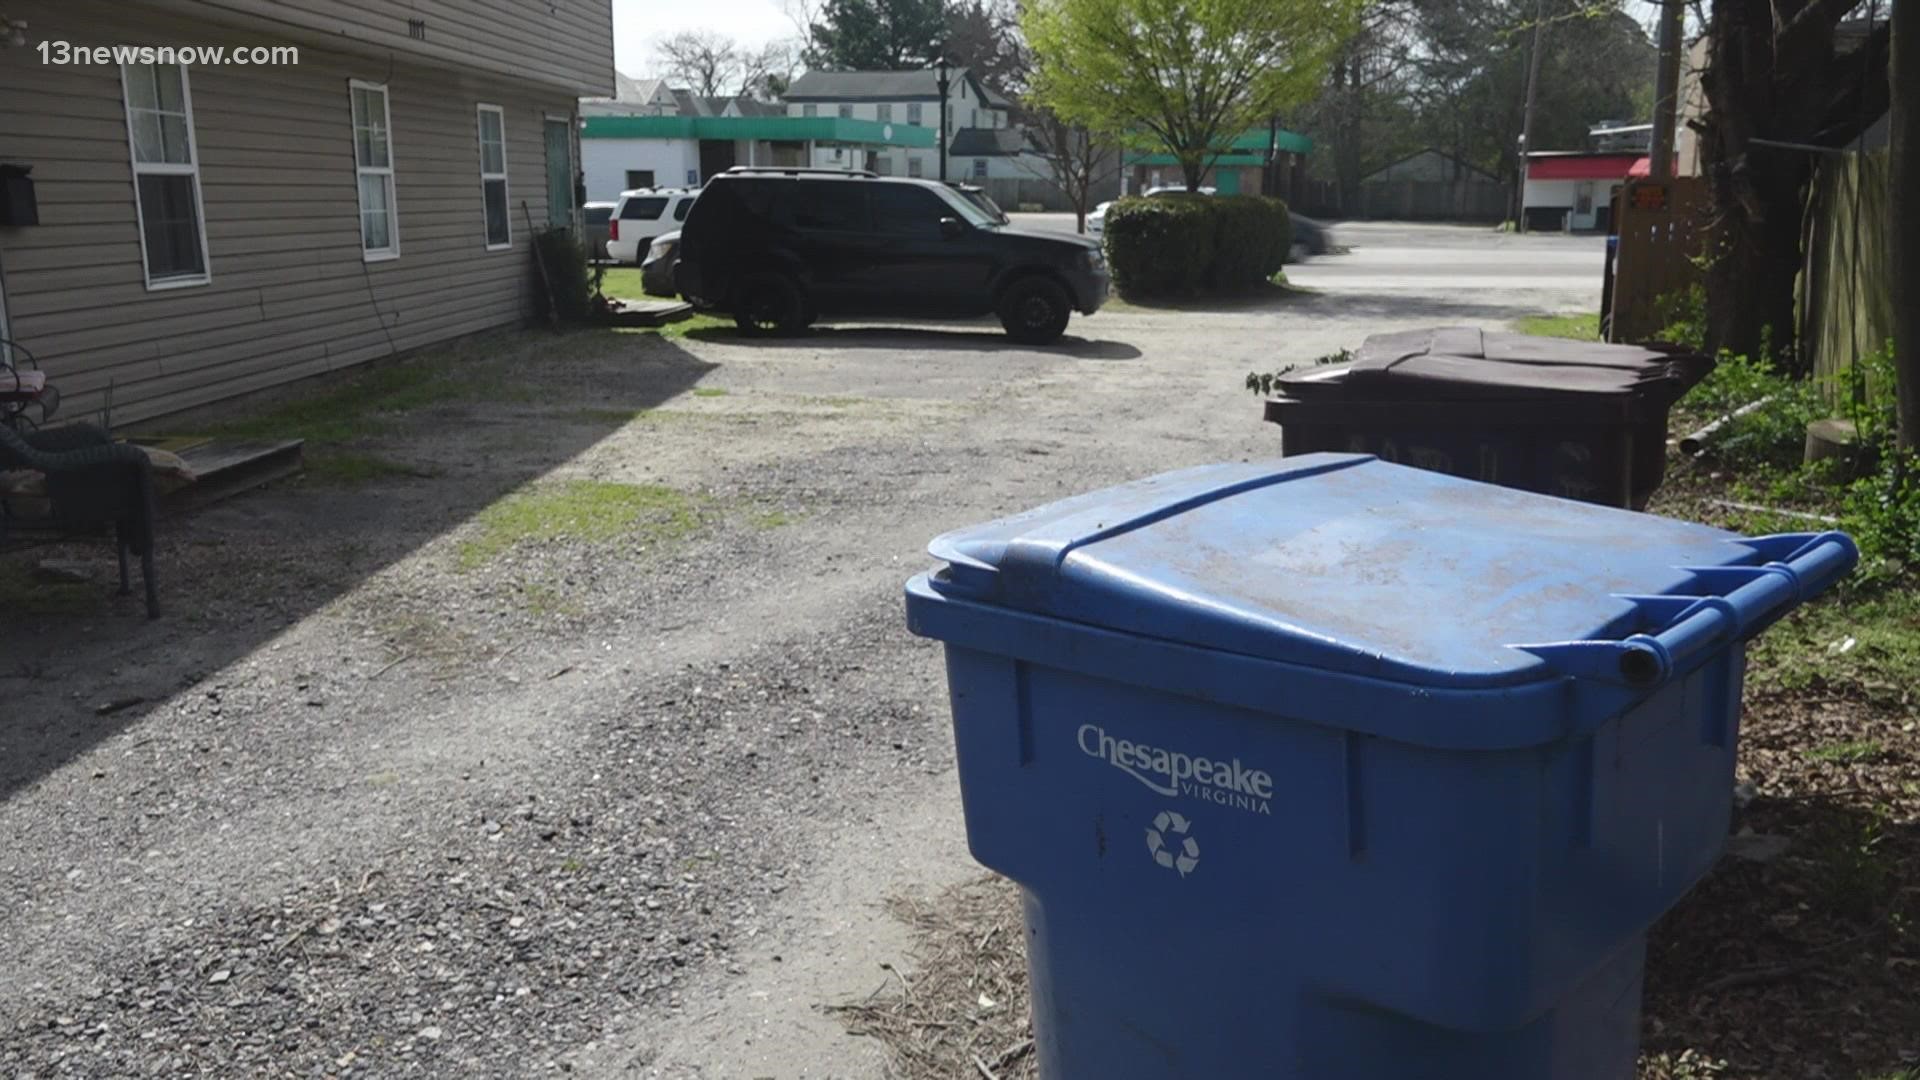 Homeowners will have to pay a private company or take their recycling to a drop-off center.